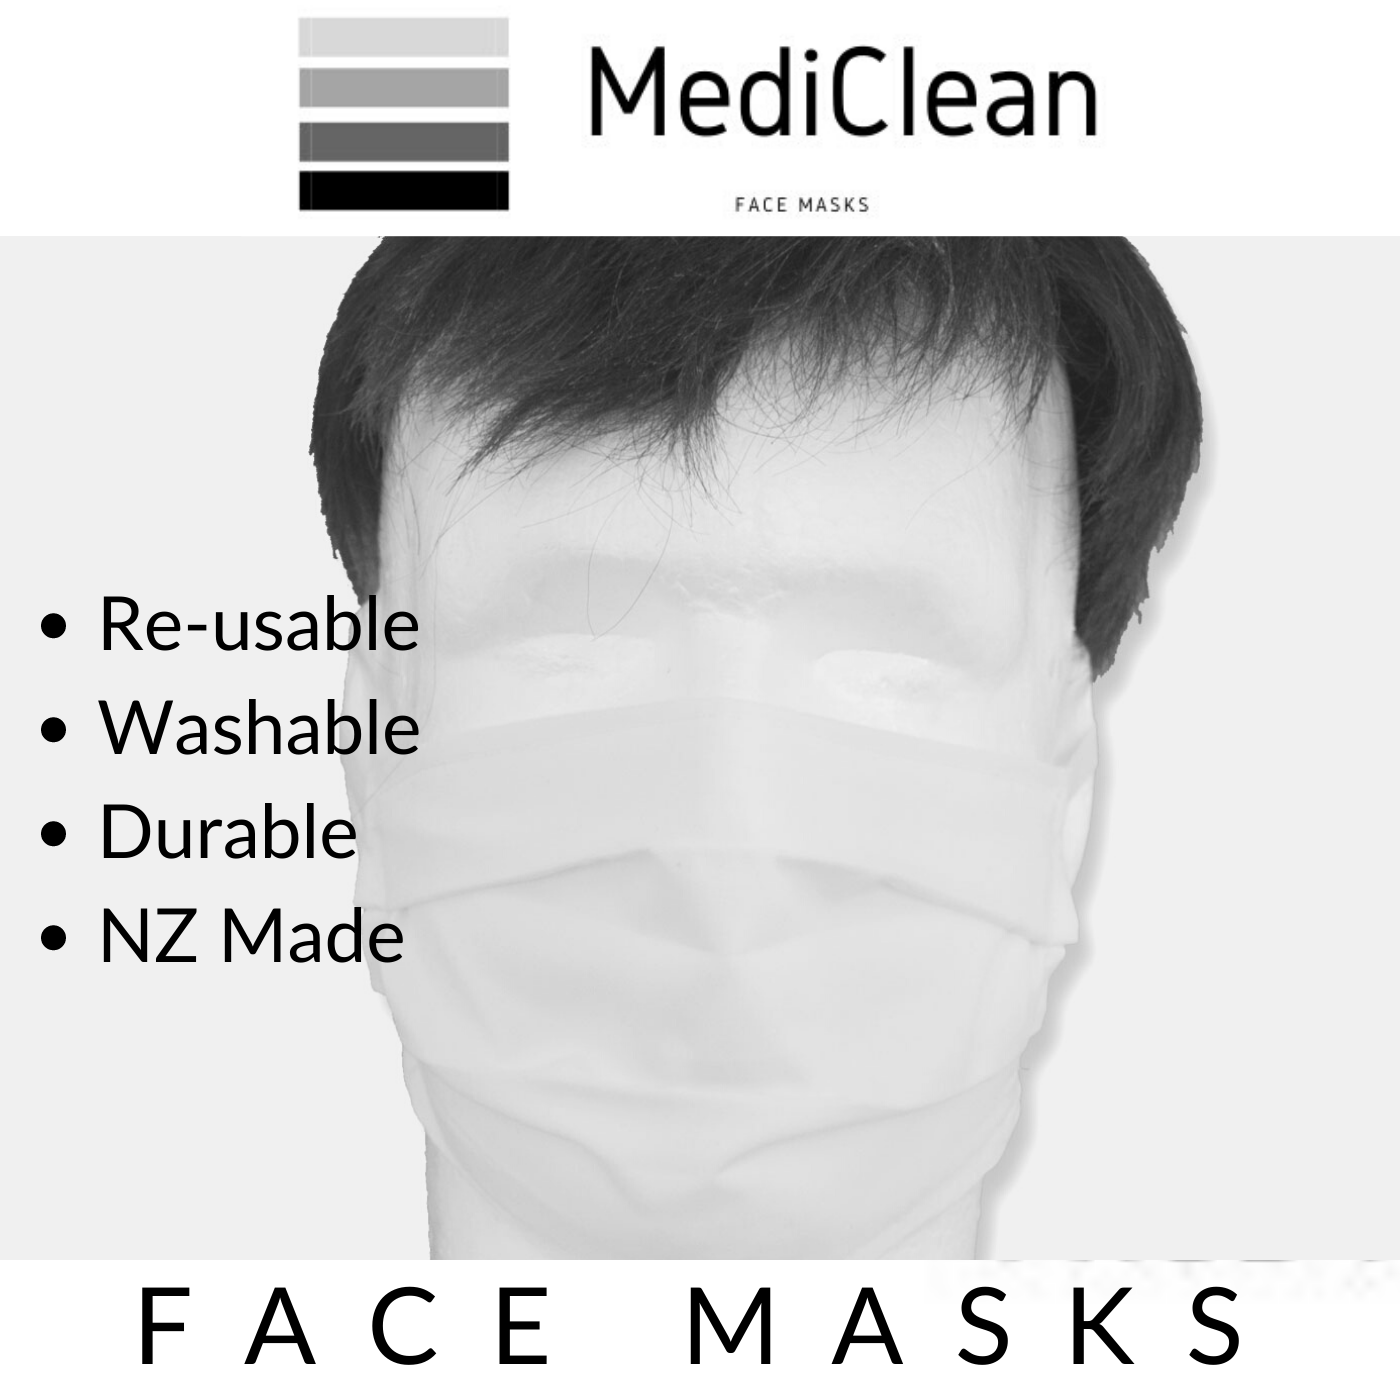 MediClean Reusable Face Mask Double Layered Made in New Zealand